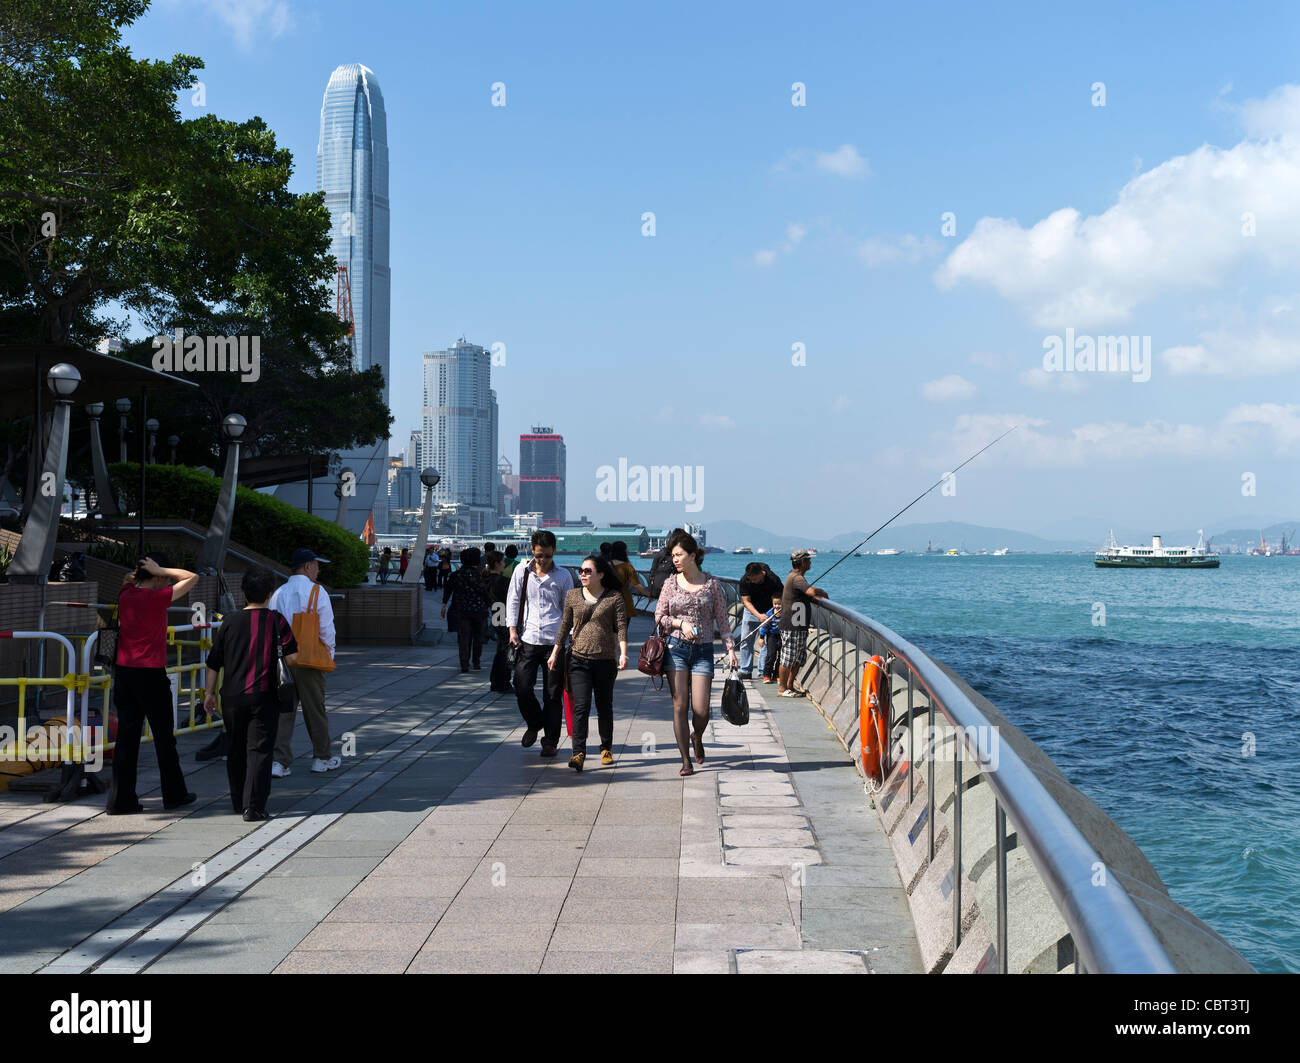 dh Expo Wan Chai Promenade WANCHAI WATERFRONT HONG KONG ISLAND People walking Central skyline front waterfront victoria harbour Stock Photo